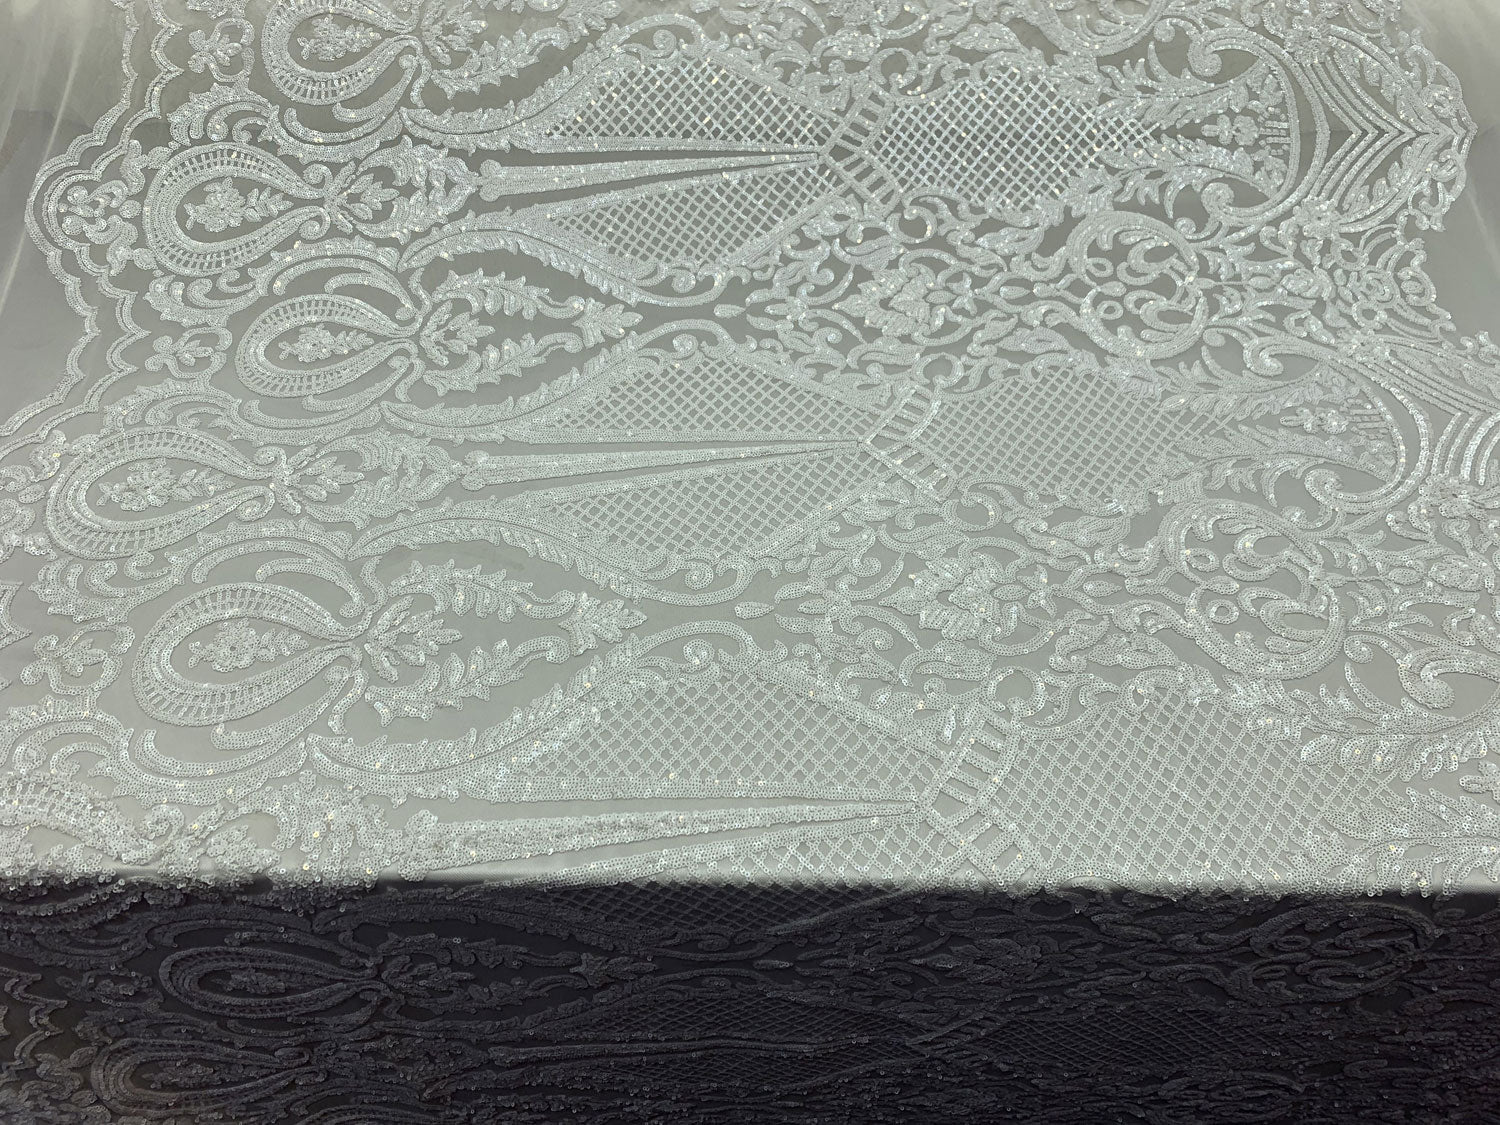 BY THE YARD/ Geometric Design Mesh Lace Fabric Sequins 4 Way Stretch On A White Mesh/Handmade Lace Embroider Prom/Gowns/Wedding DressICE FABRICSICE FABRICSGreenBY THE YARD/ Geometric Design Mesh Lace Fabric Sequins 4 Way Stretch On A White Mesh/Handmade Lace Embroider Prom/Gowns/Wedding Dress ICE FABRICS White